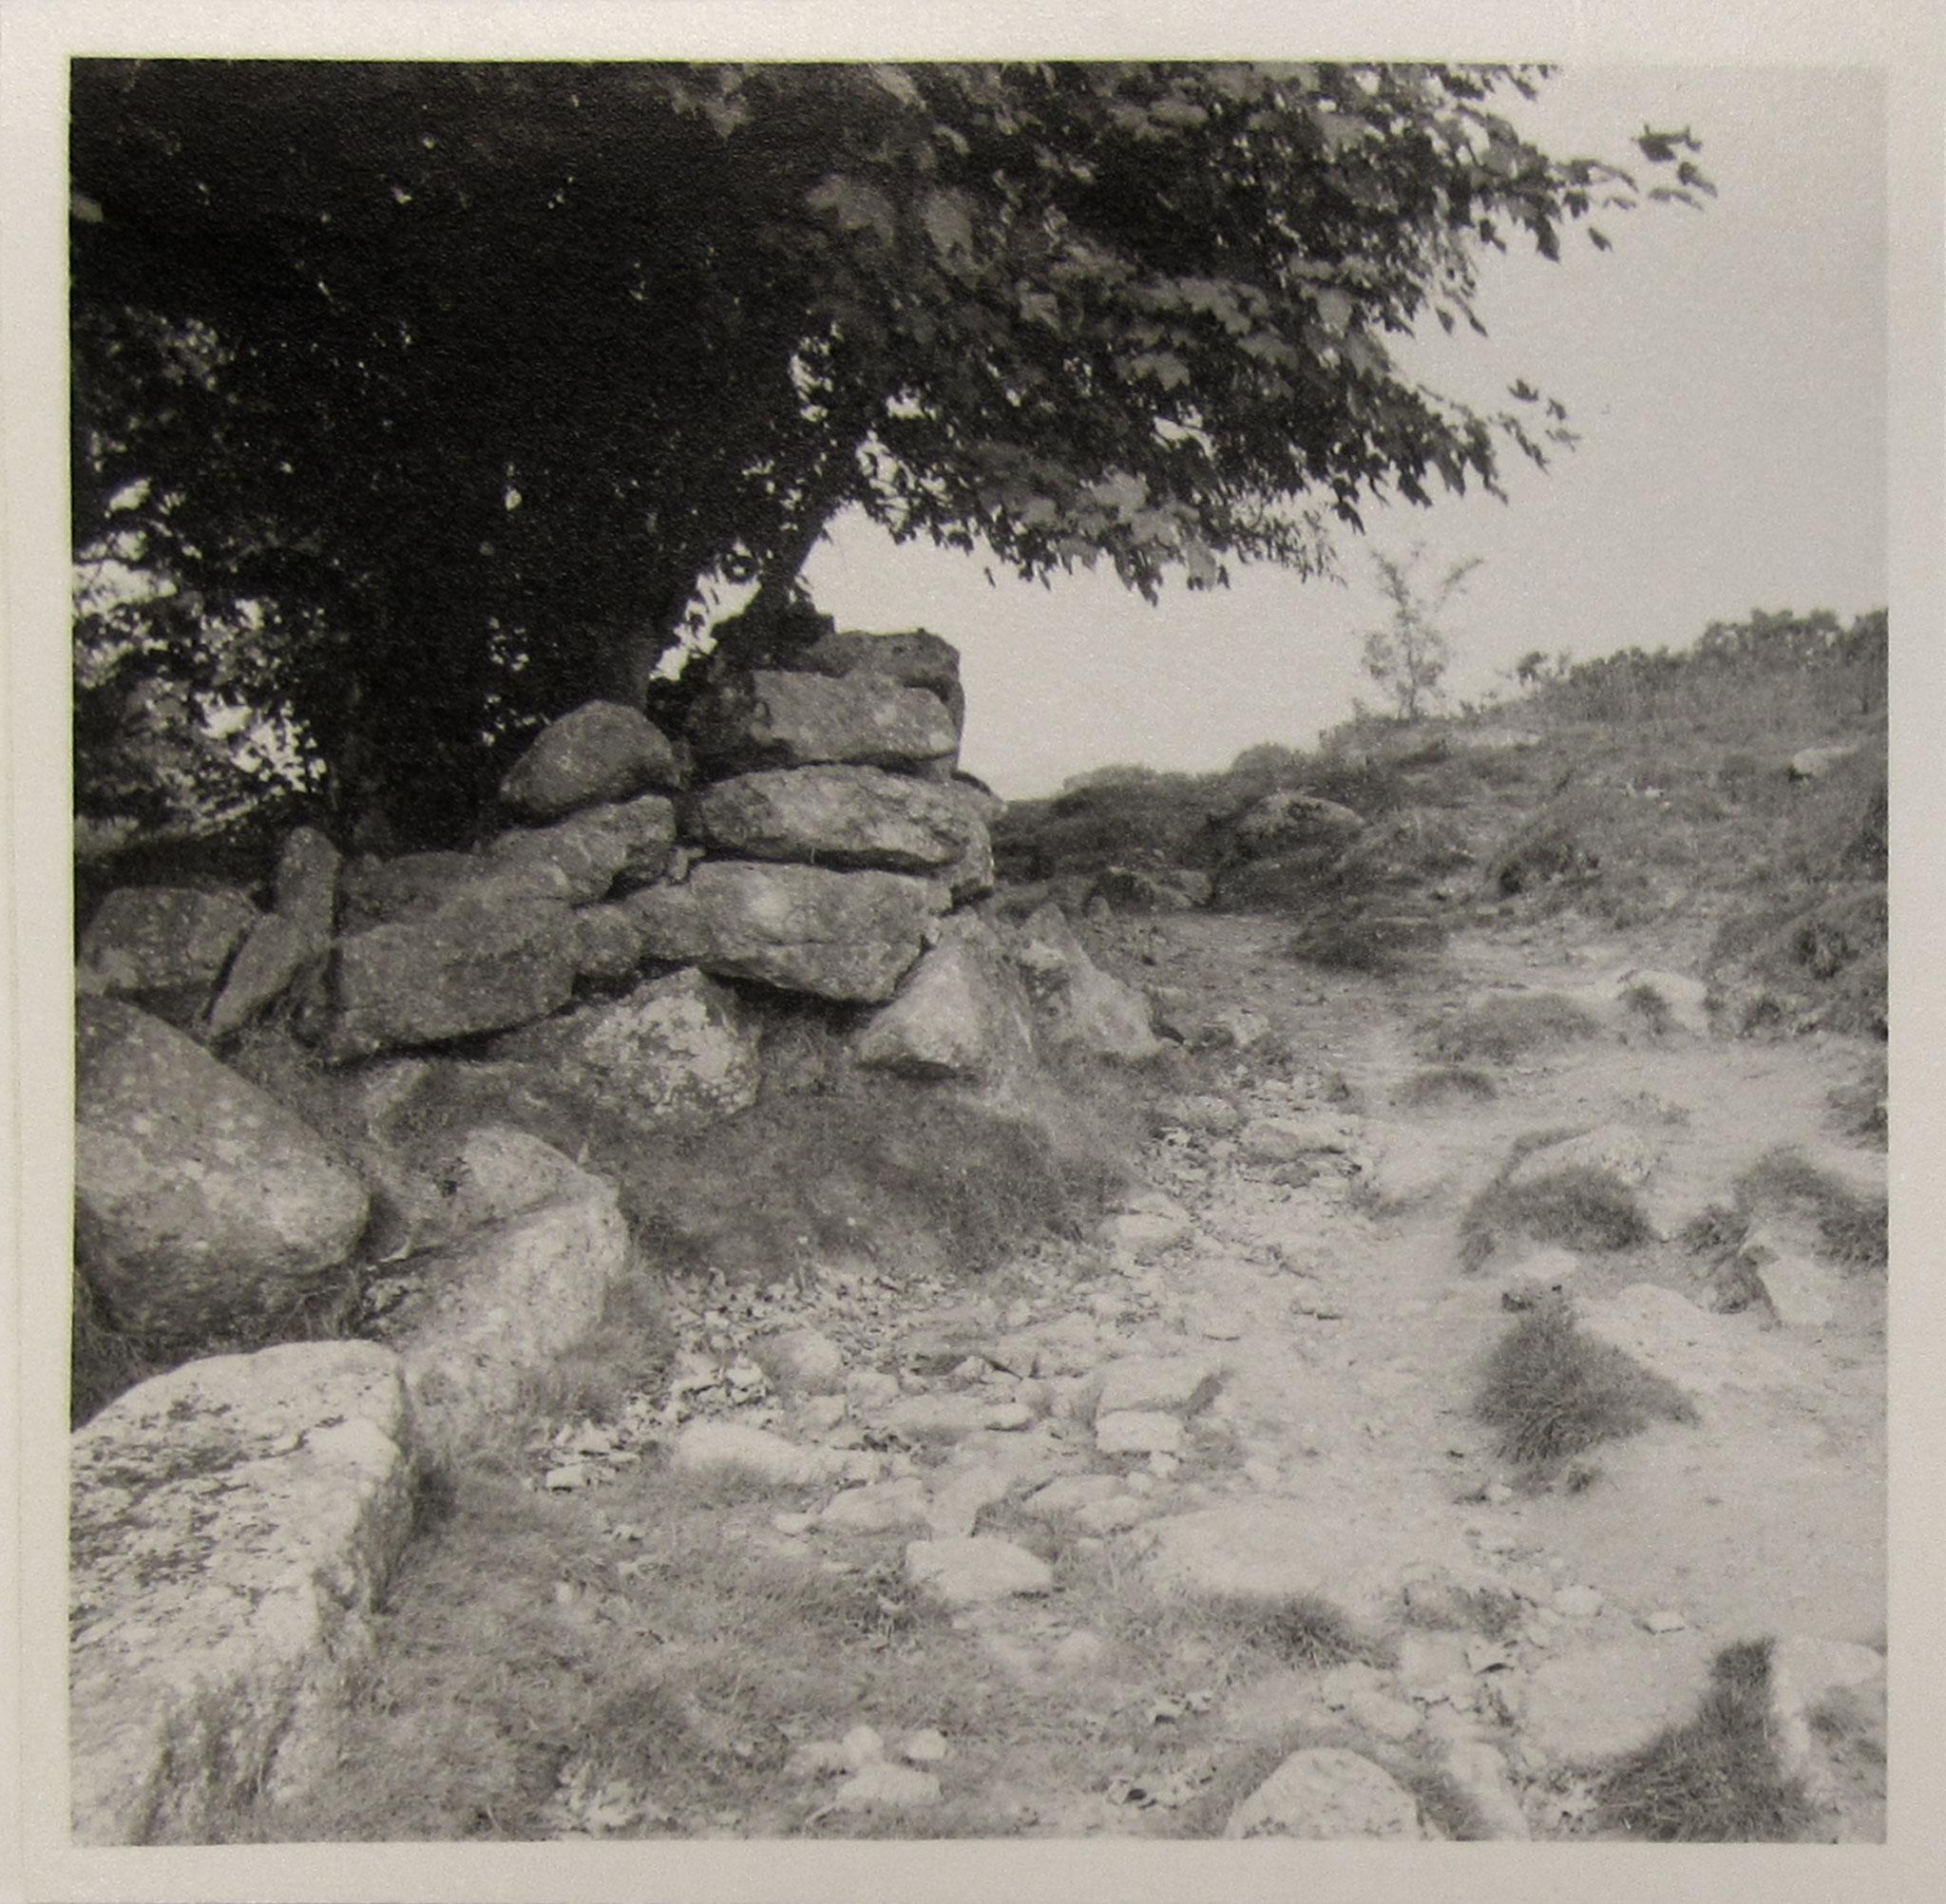 a black and white images looking up at a pile of rocks positioned under a tree